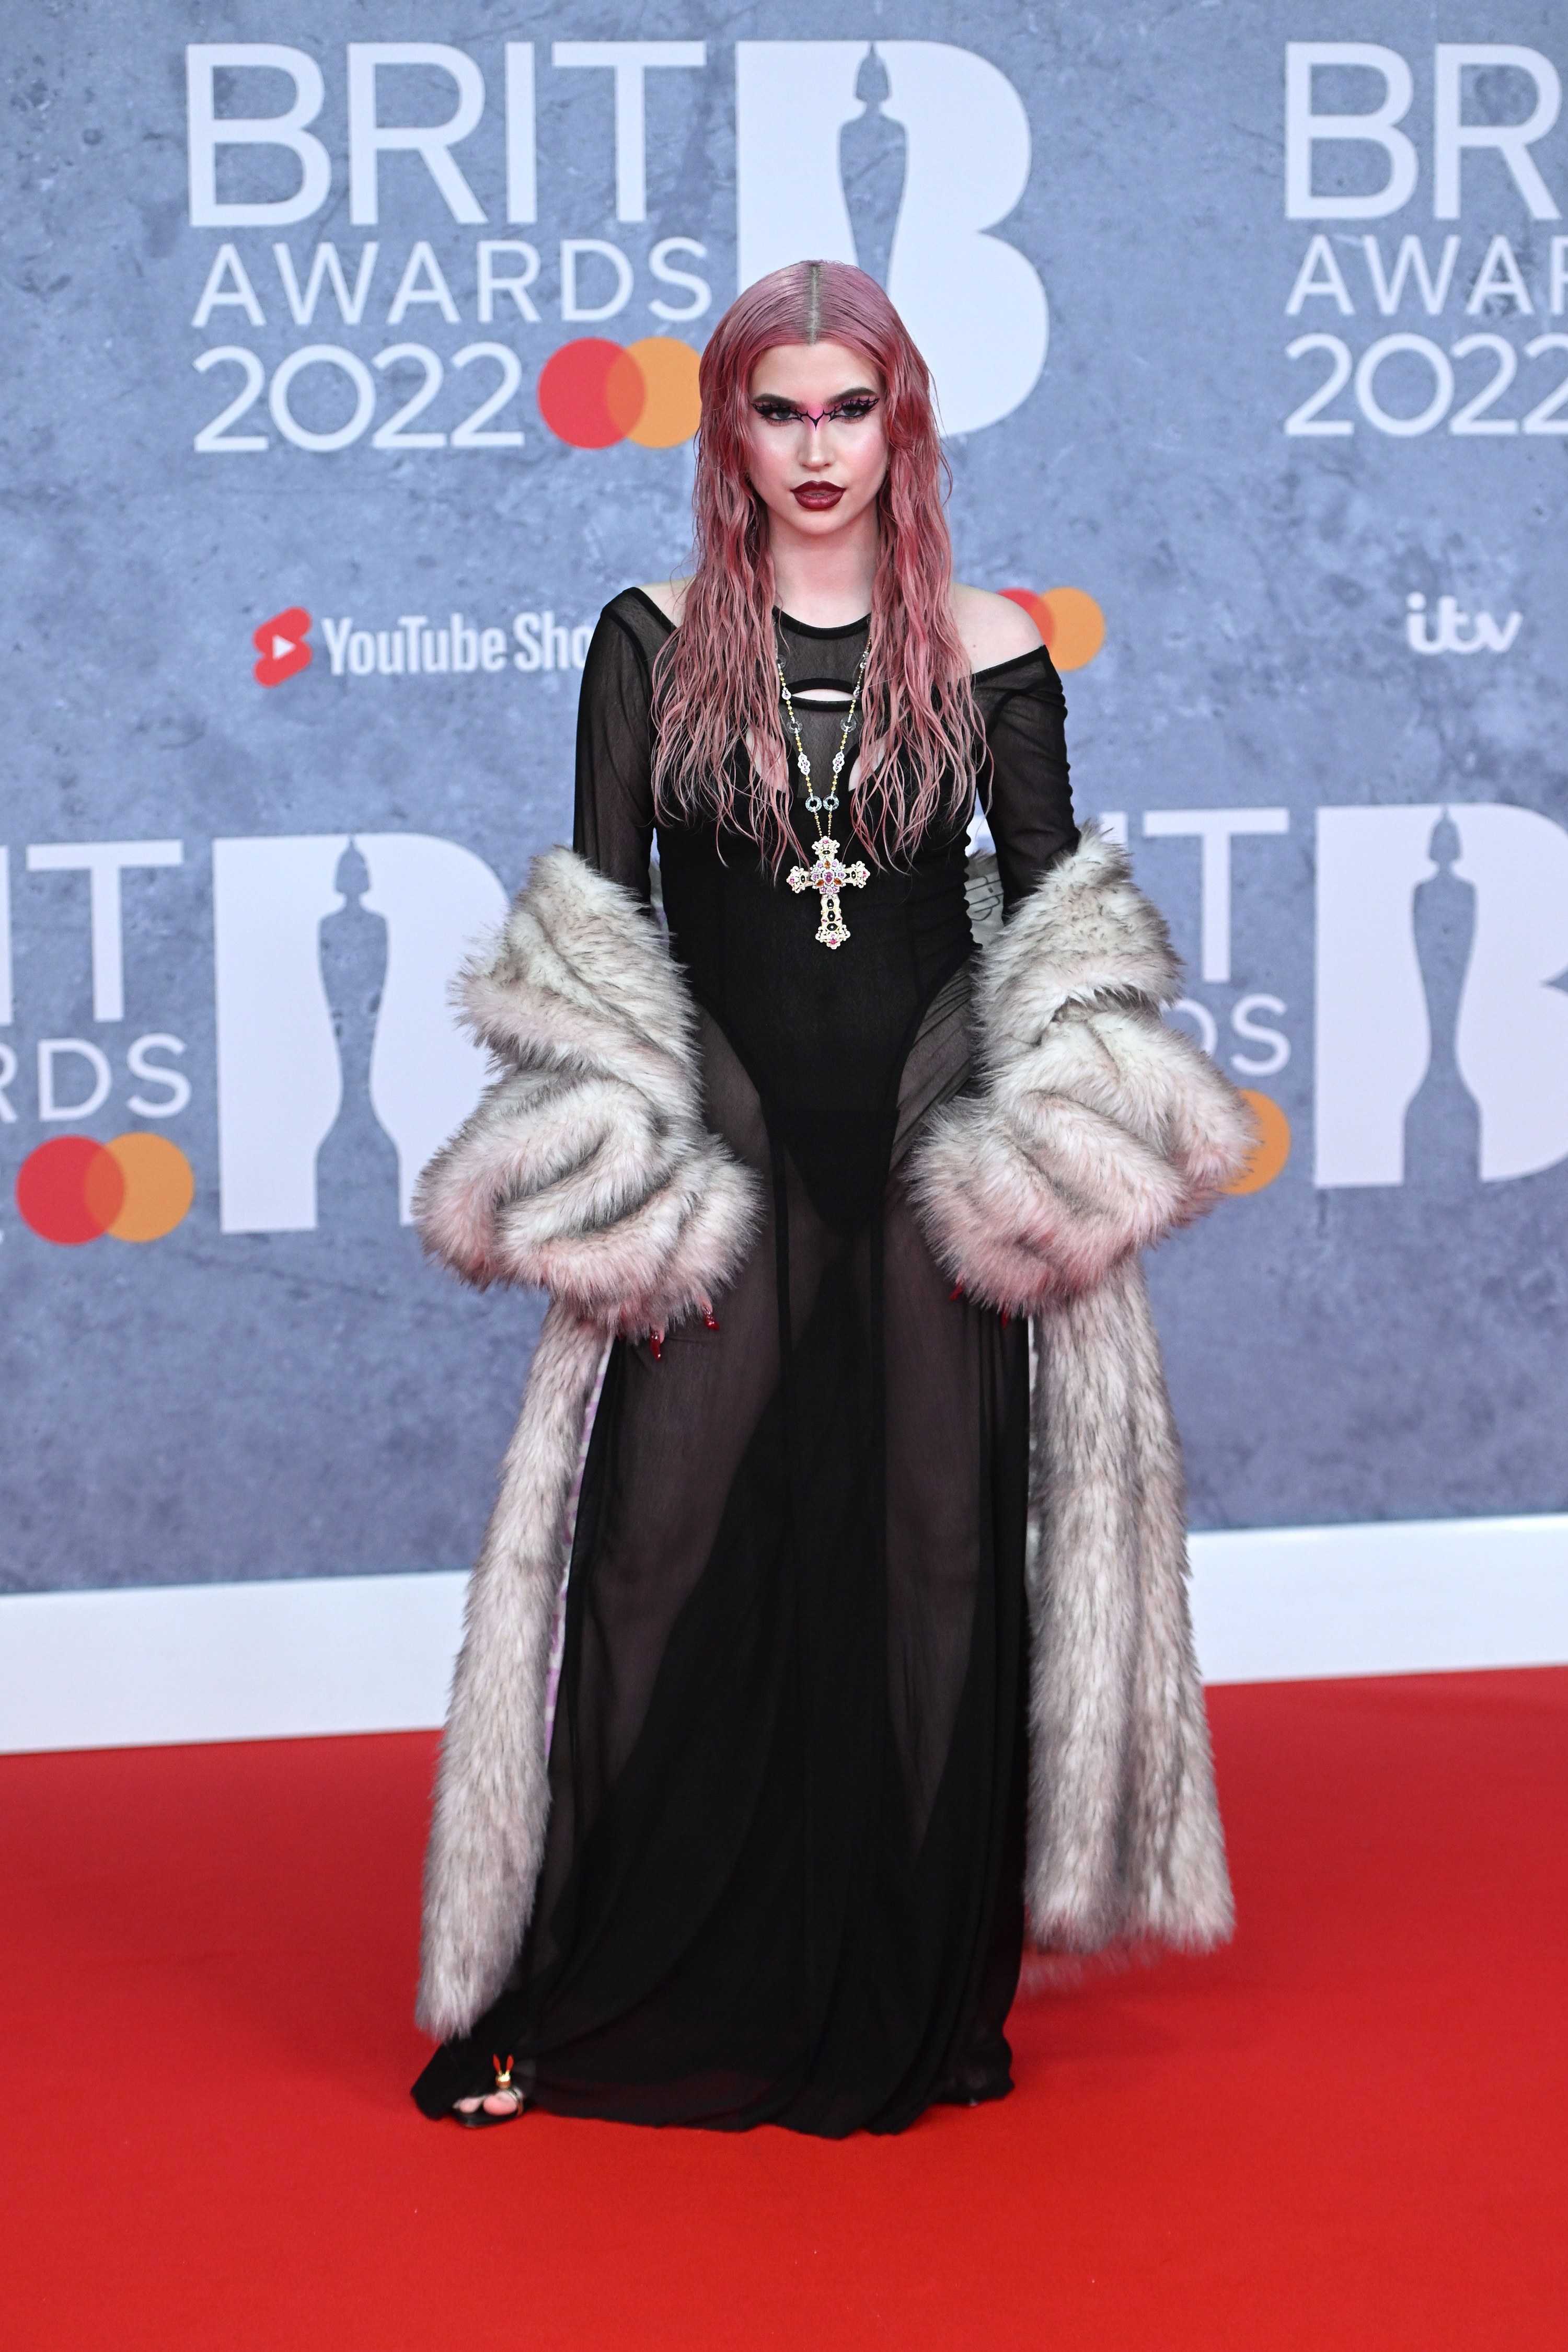 Abby wears a long sheer dress with a black bodysuit and a fur coat